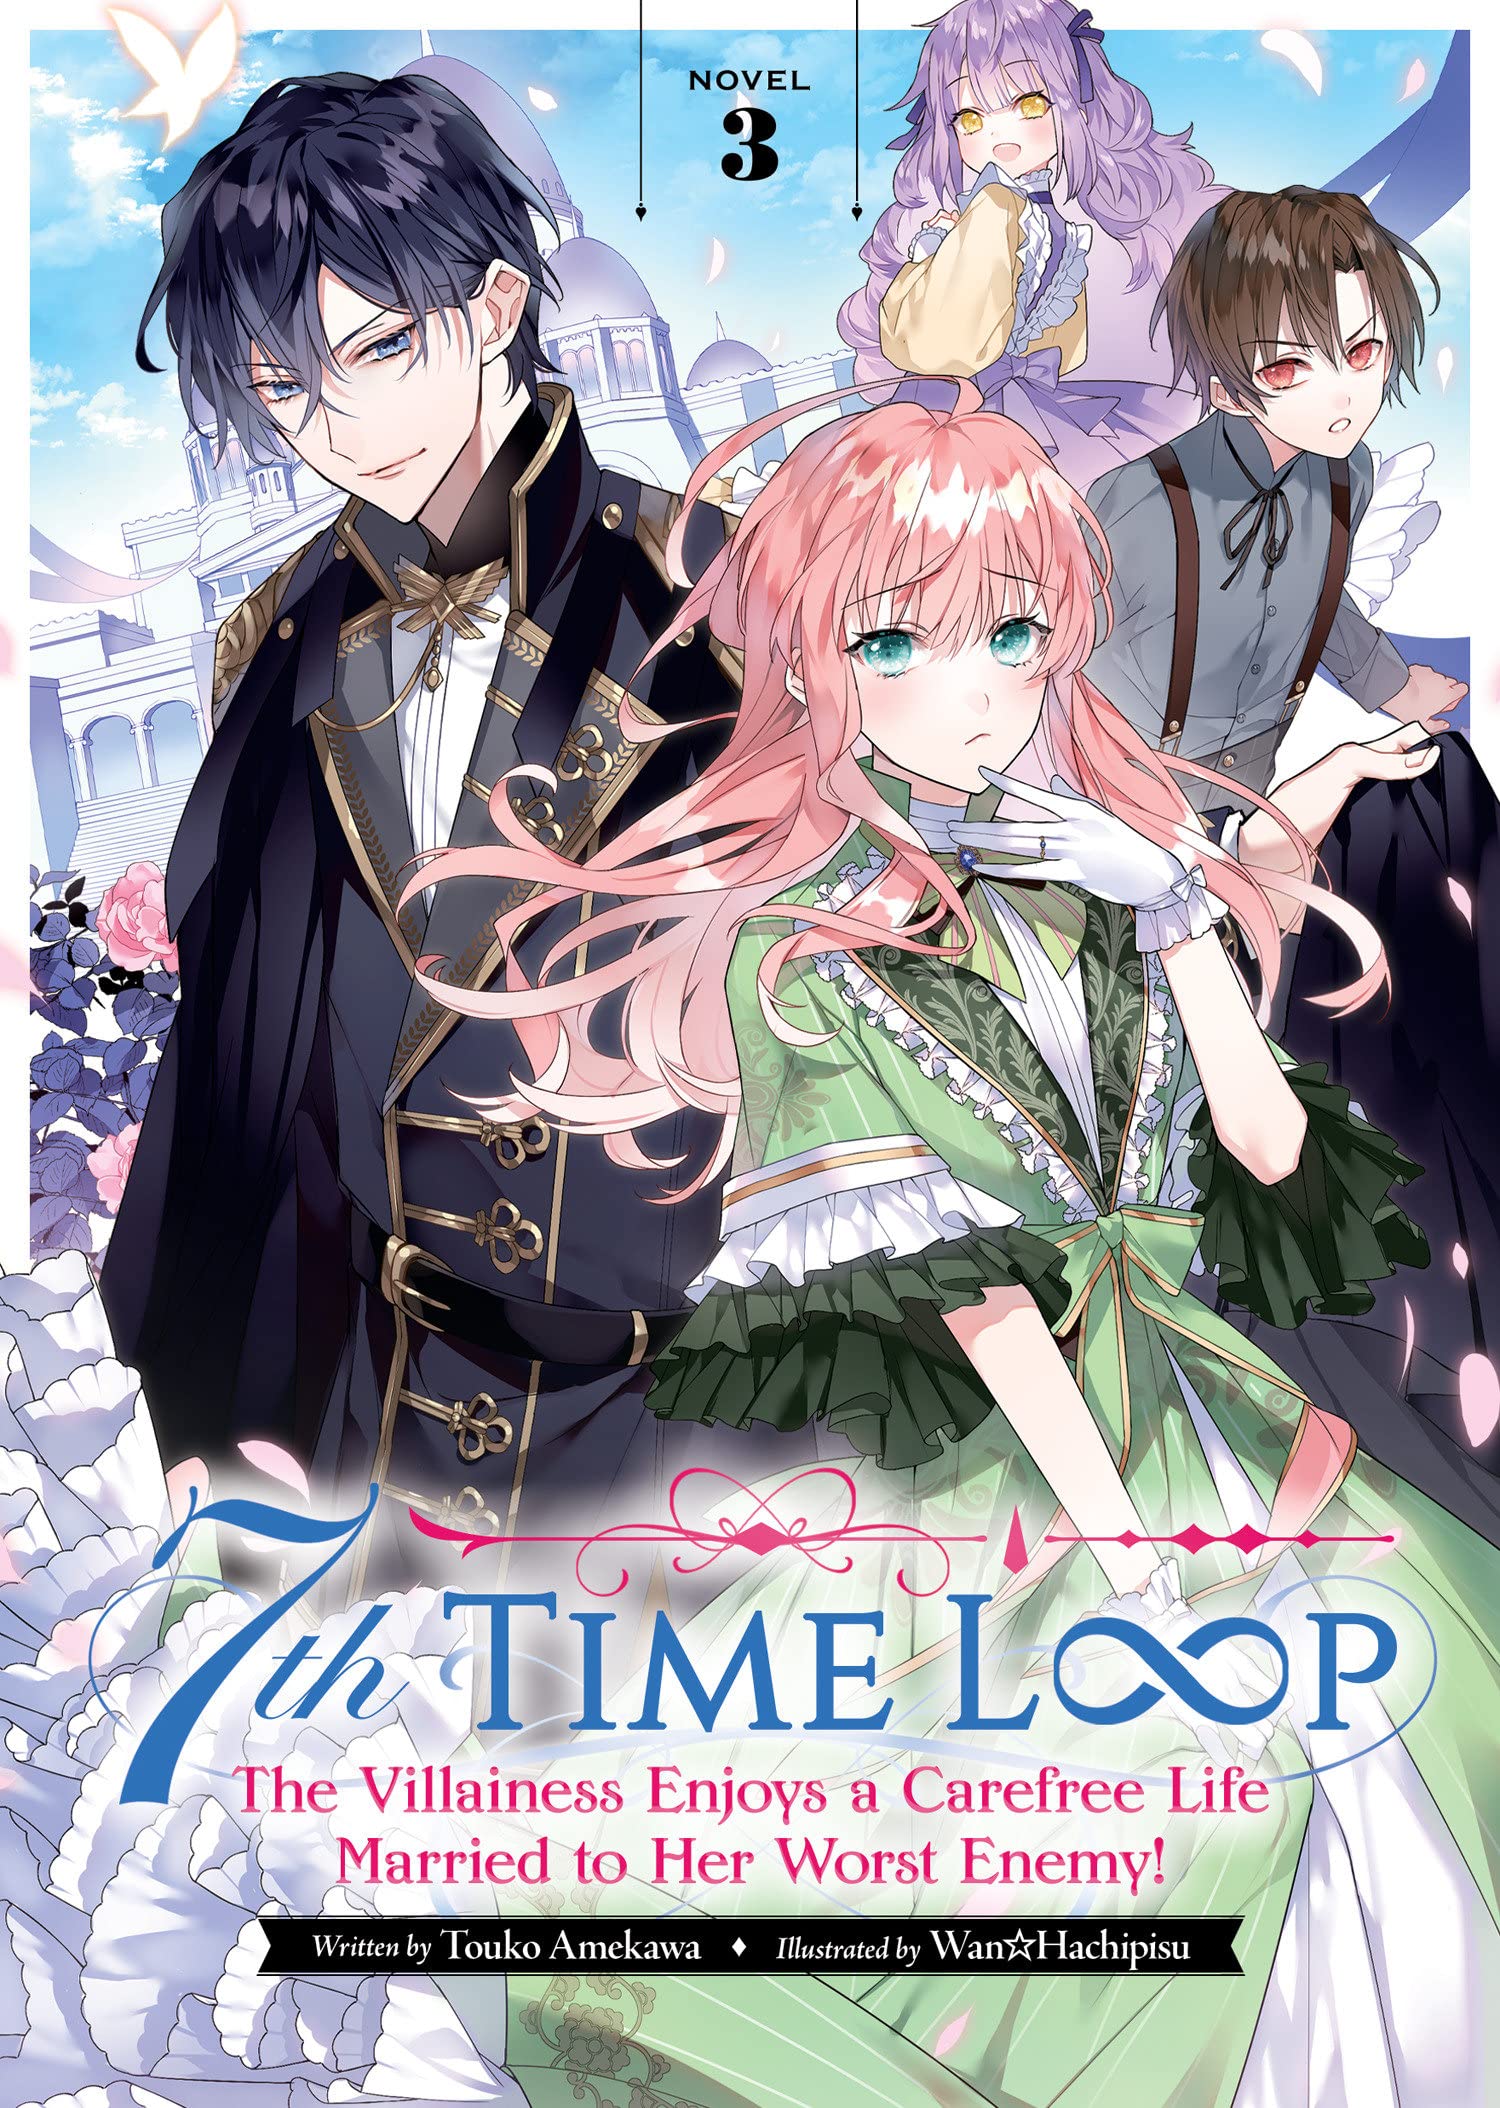 7th Time Loop: The Villainess Enjoys a Carefree Life Married to Her Worst Enemy! (Light Novel) Vol. 03